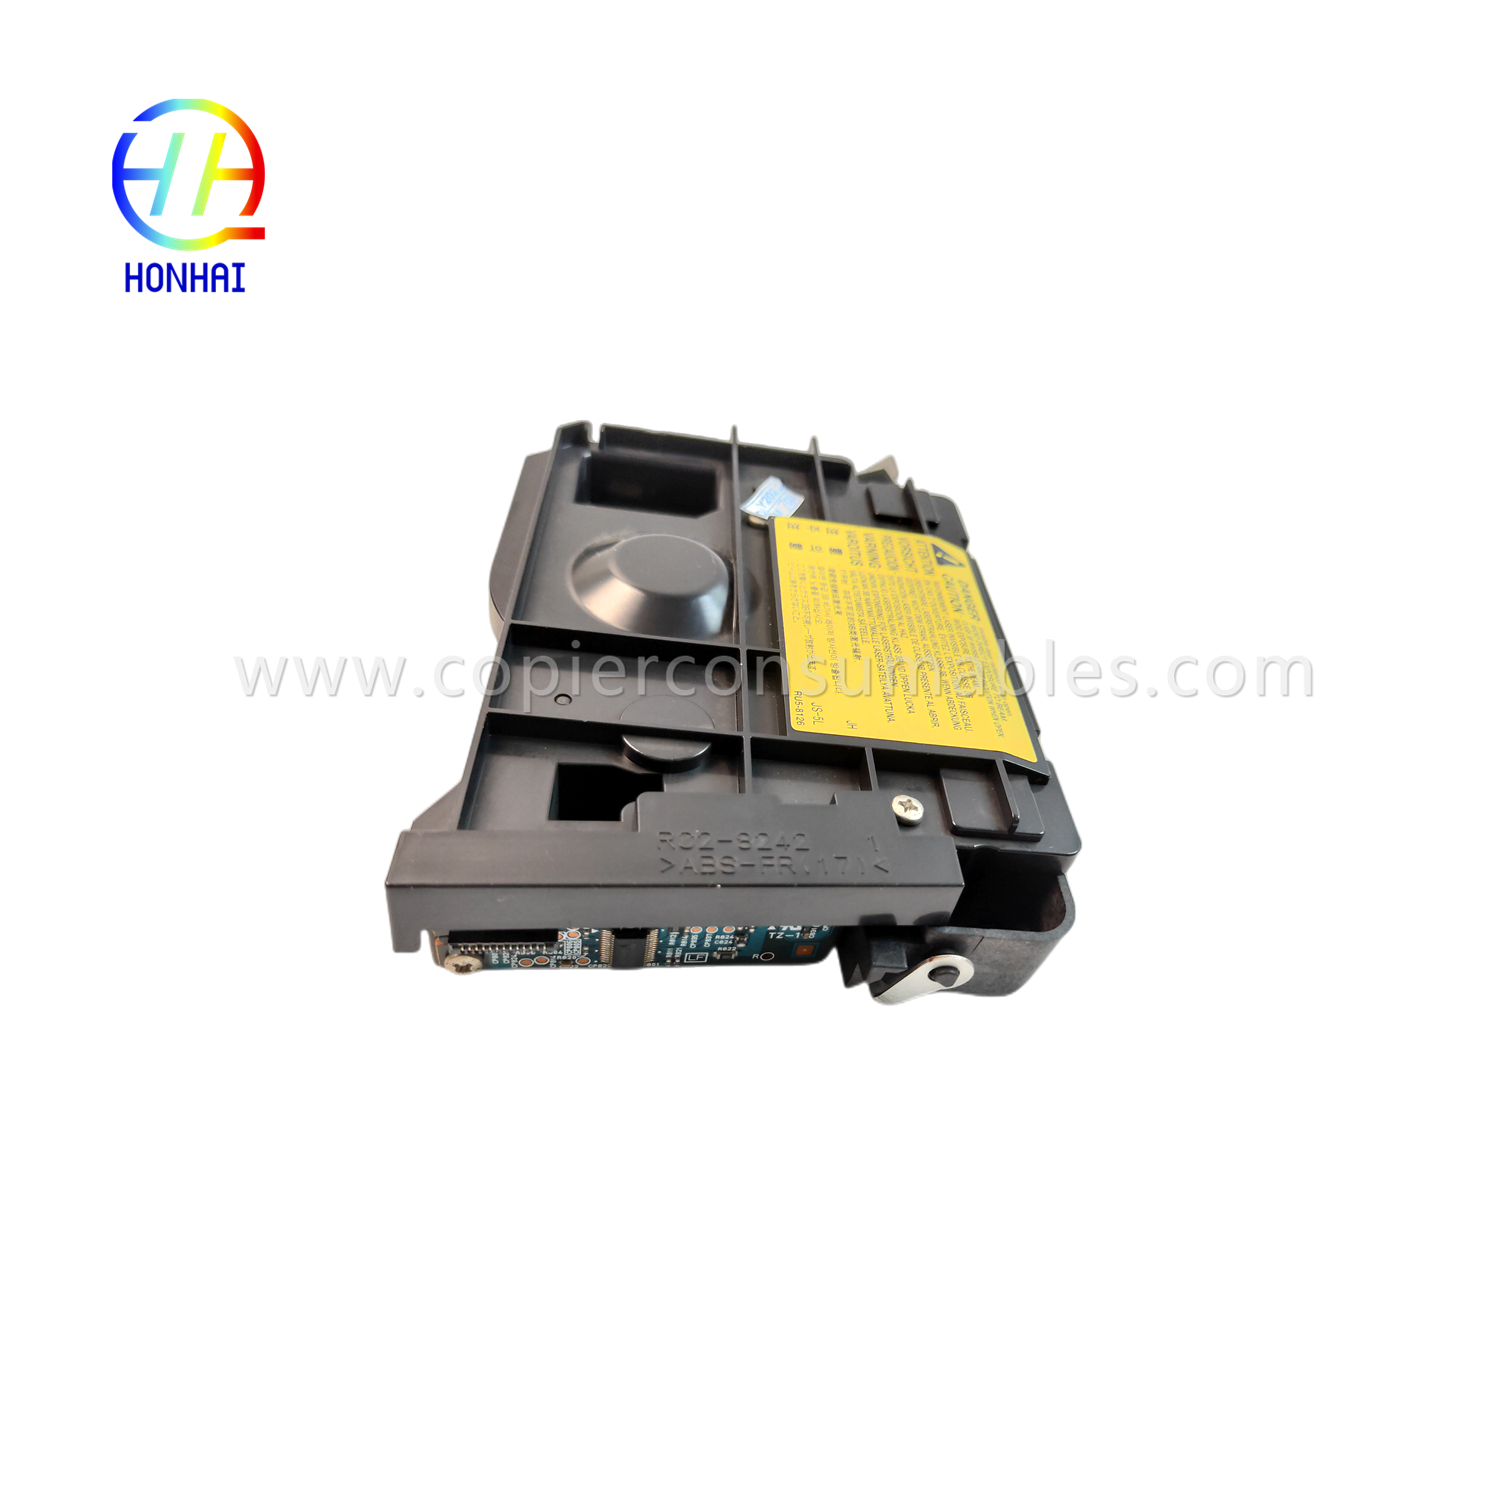 https://c585.goodao.net/printer-laserhead-for-hp-laser-jet-p2035-p2035dn-rc2-8242-product/